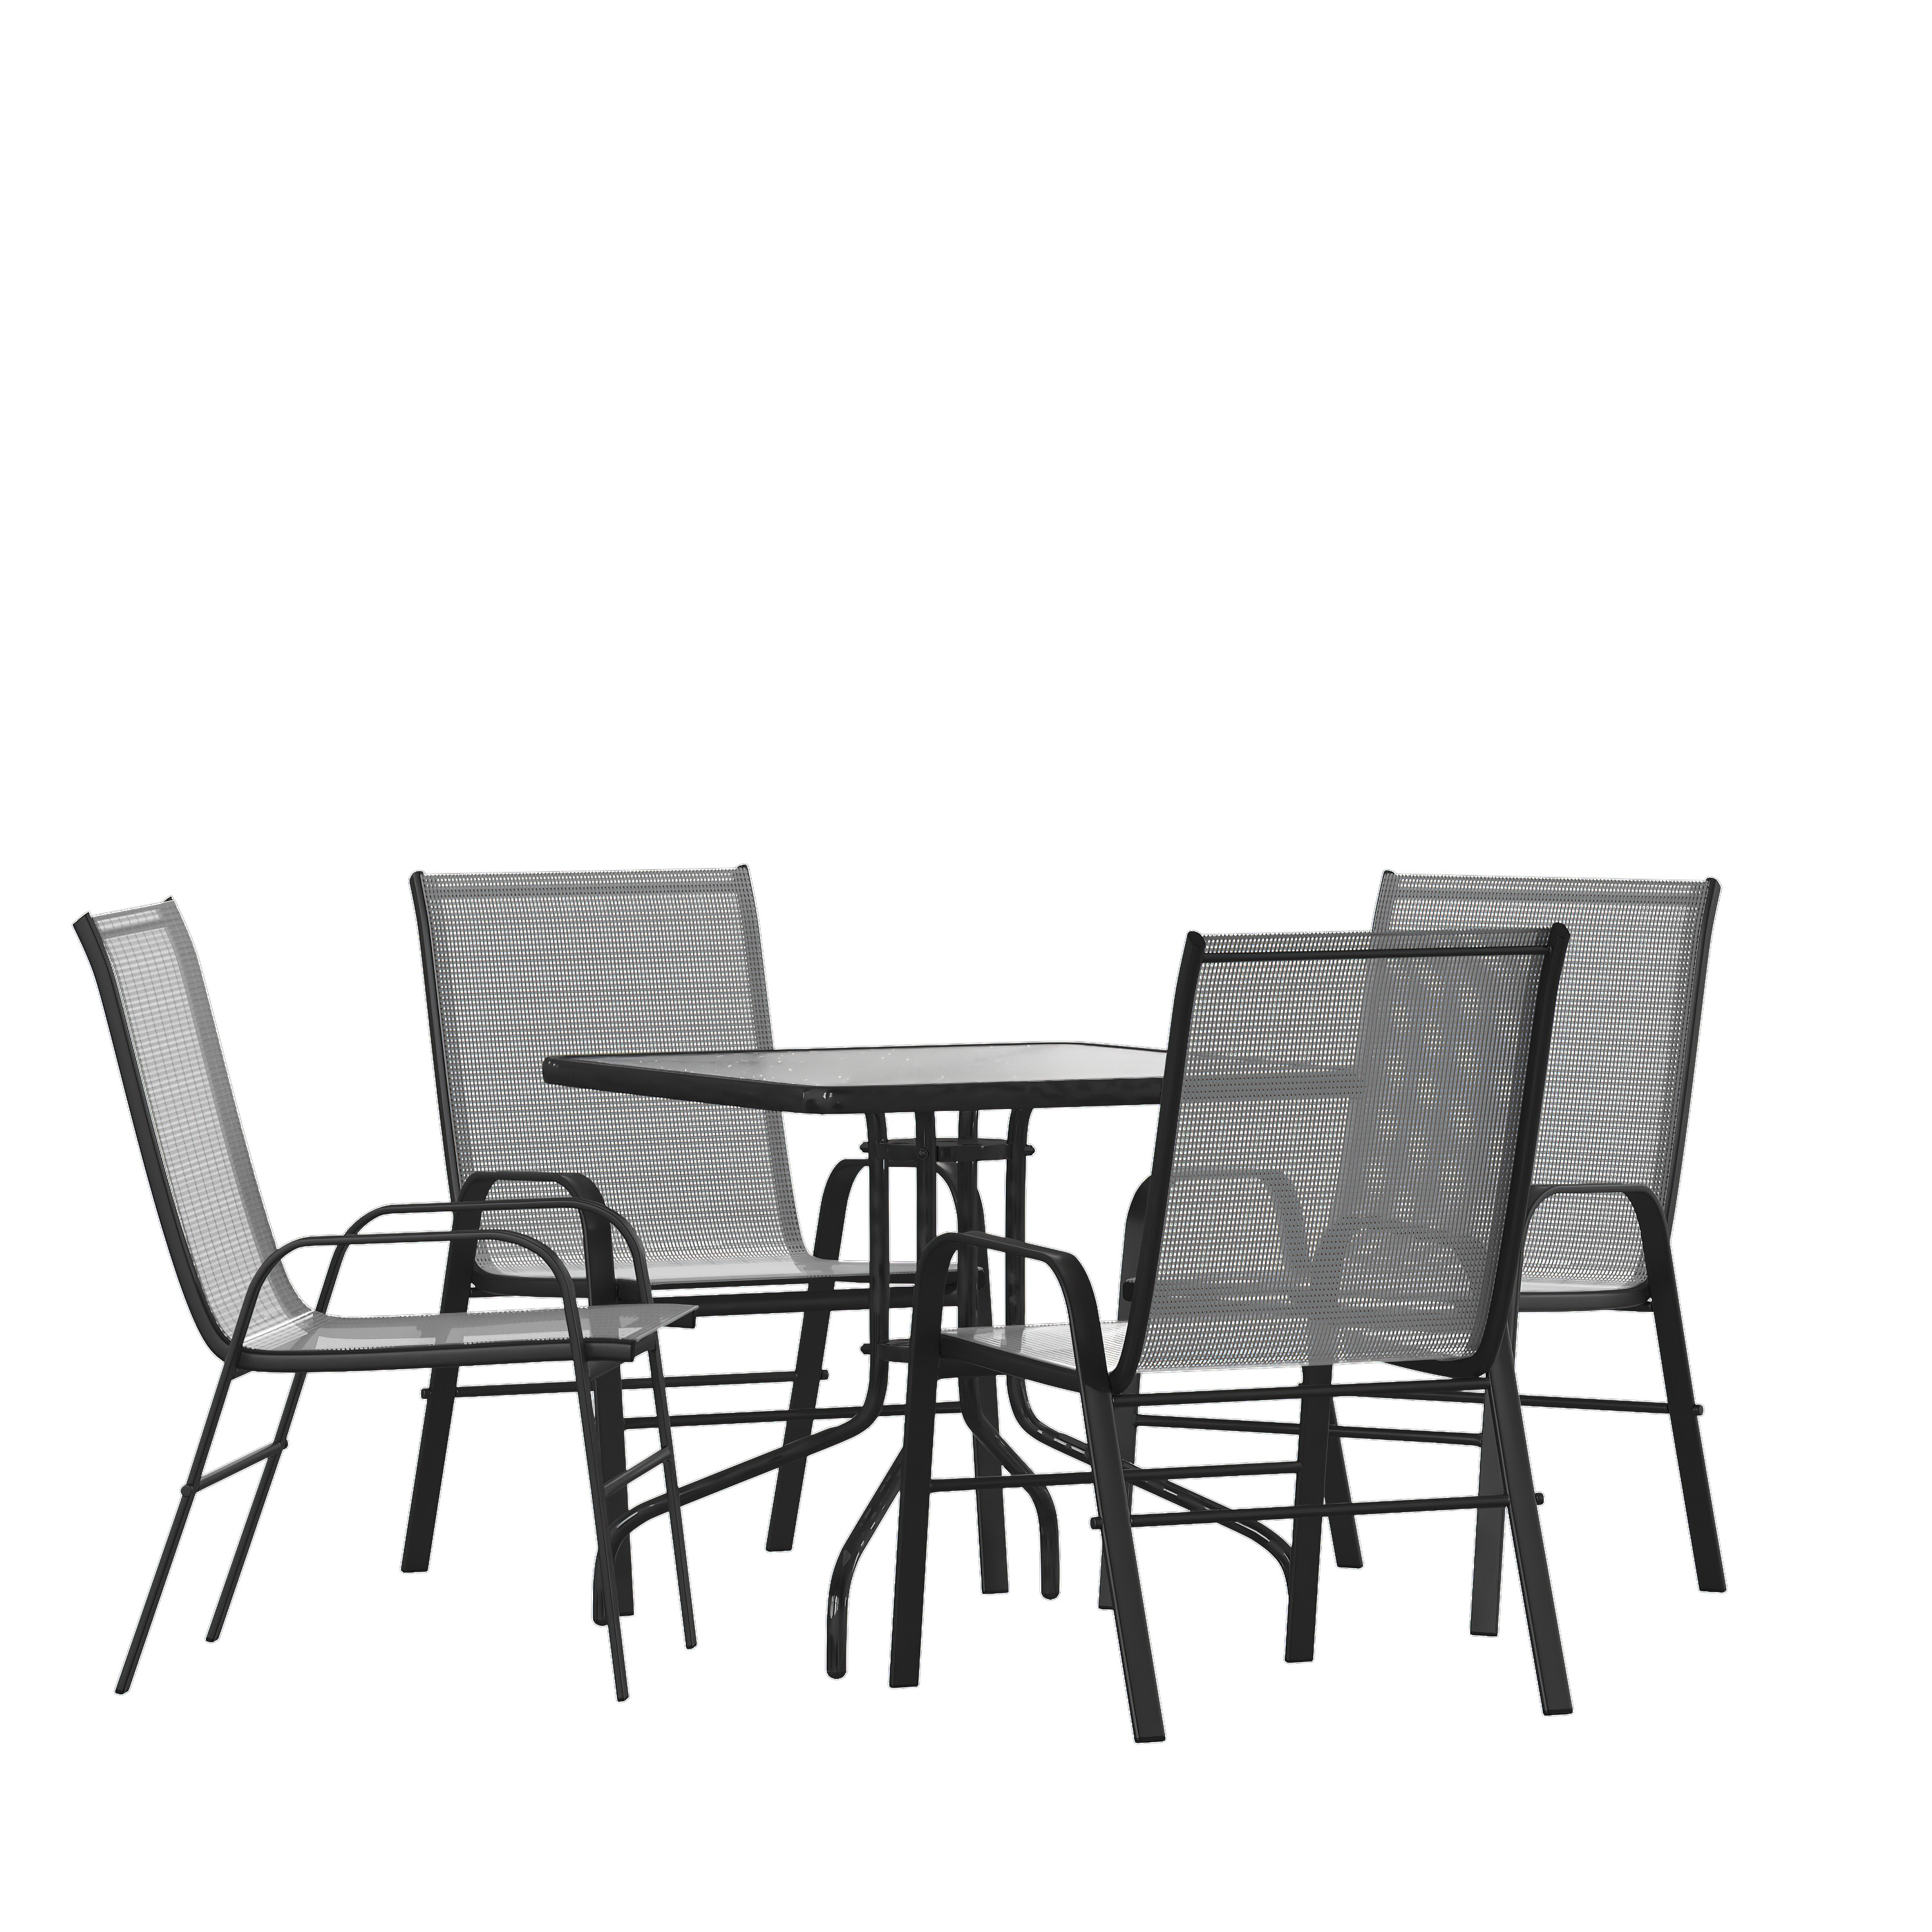 Flash Furniture TLH-073A2303C-GY-GG 31.5" Square Tempered Glass Patio Table, 4 Gray Flex Comfort Stack Chairs, 5 Piece Set